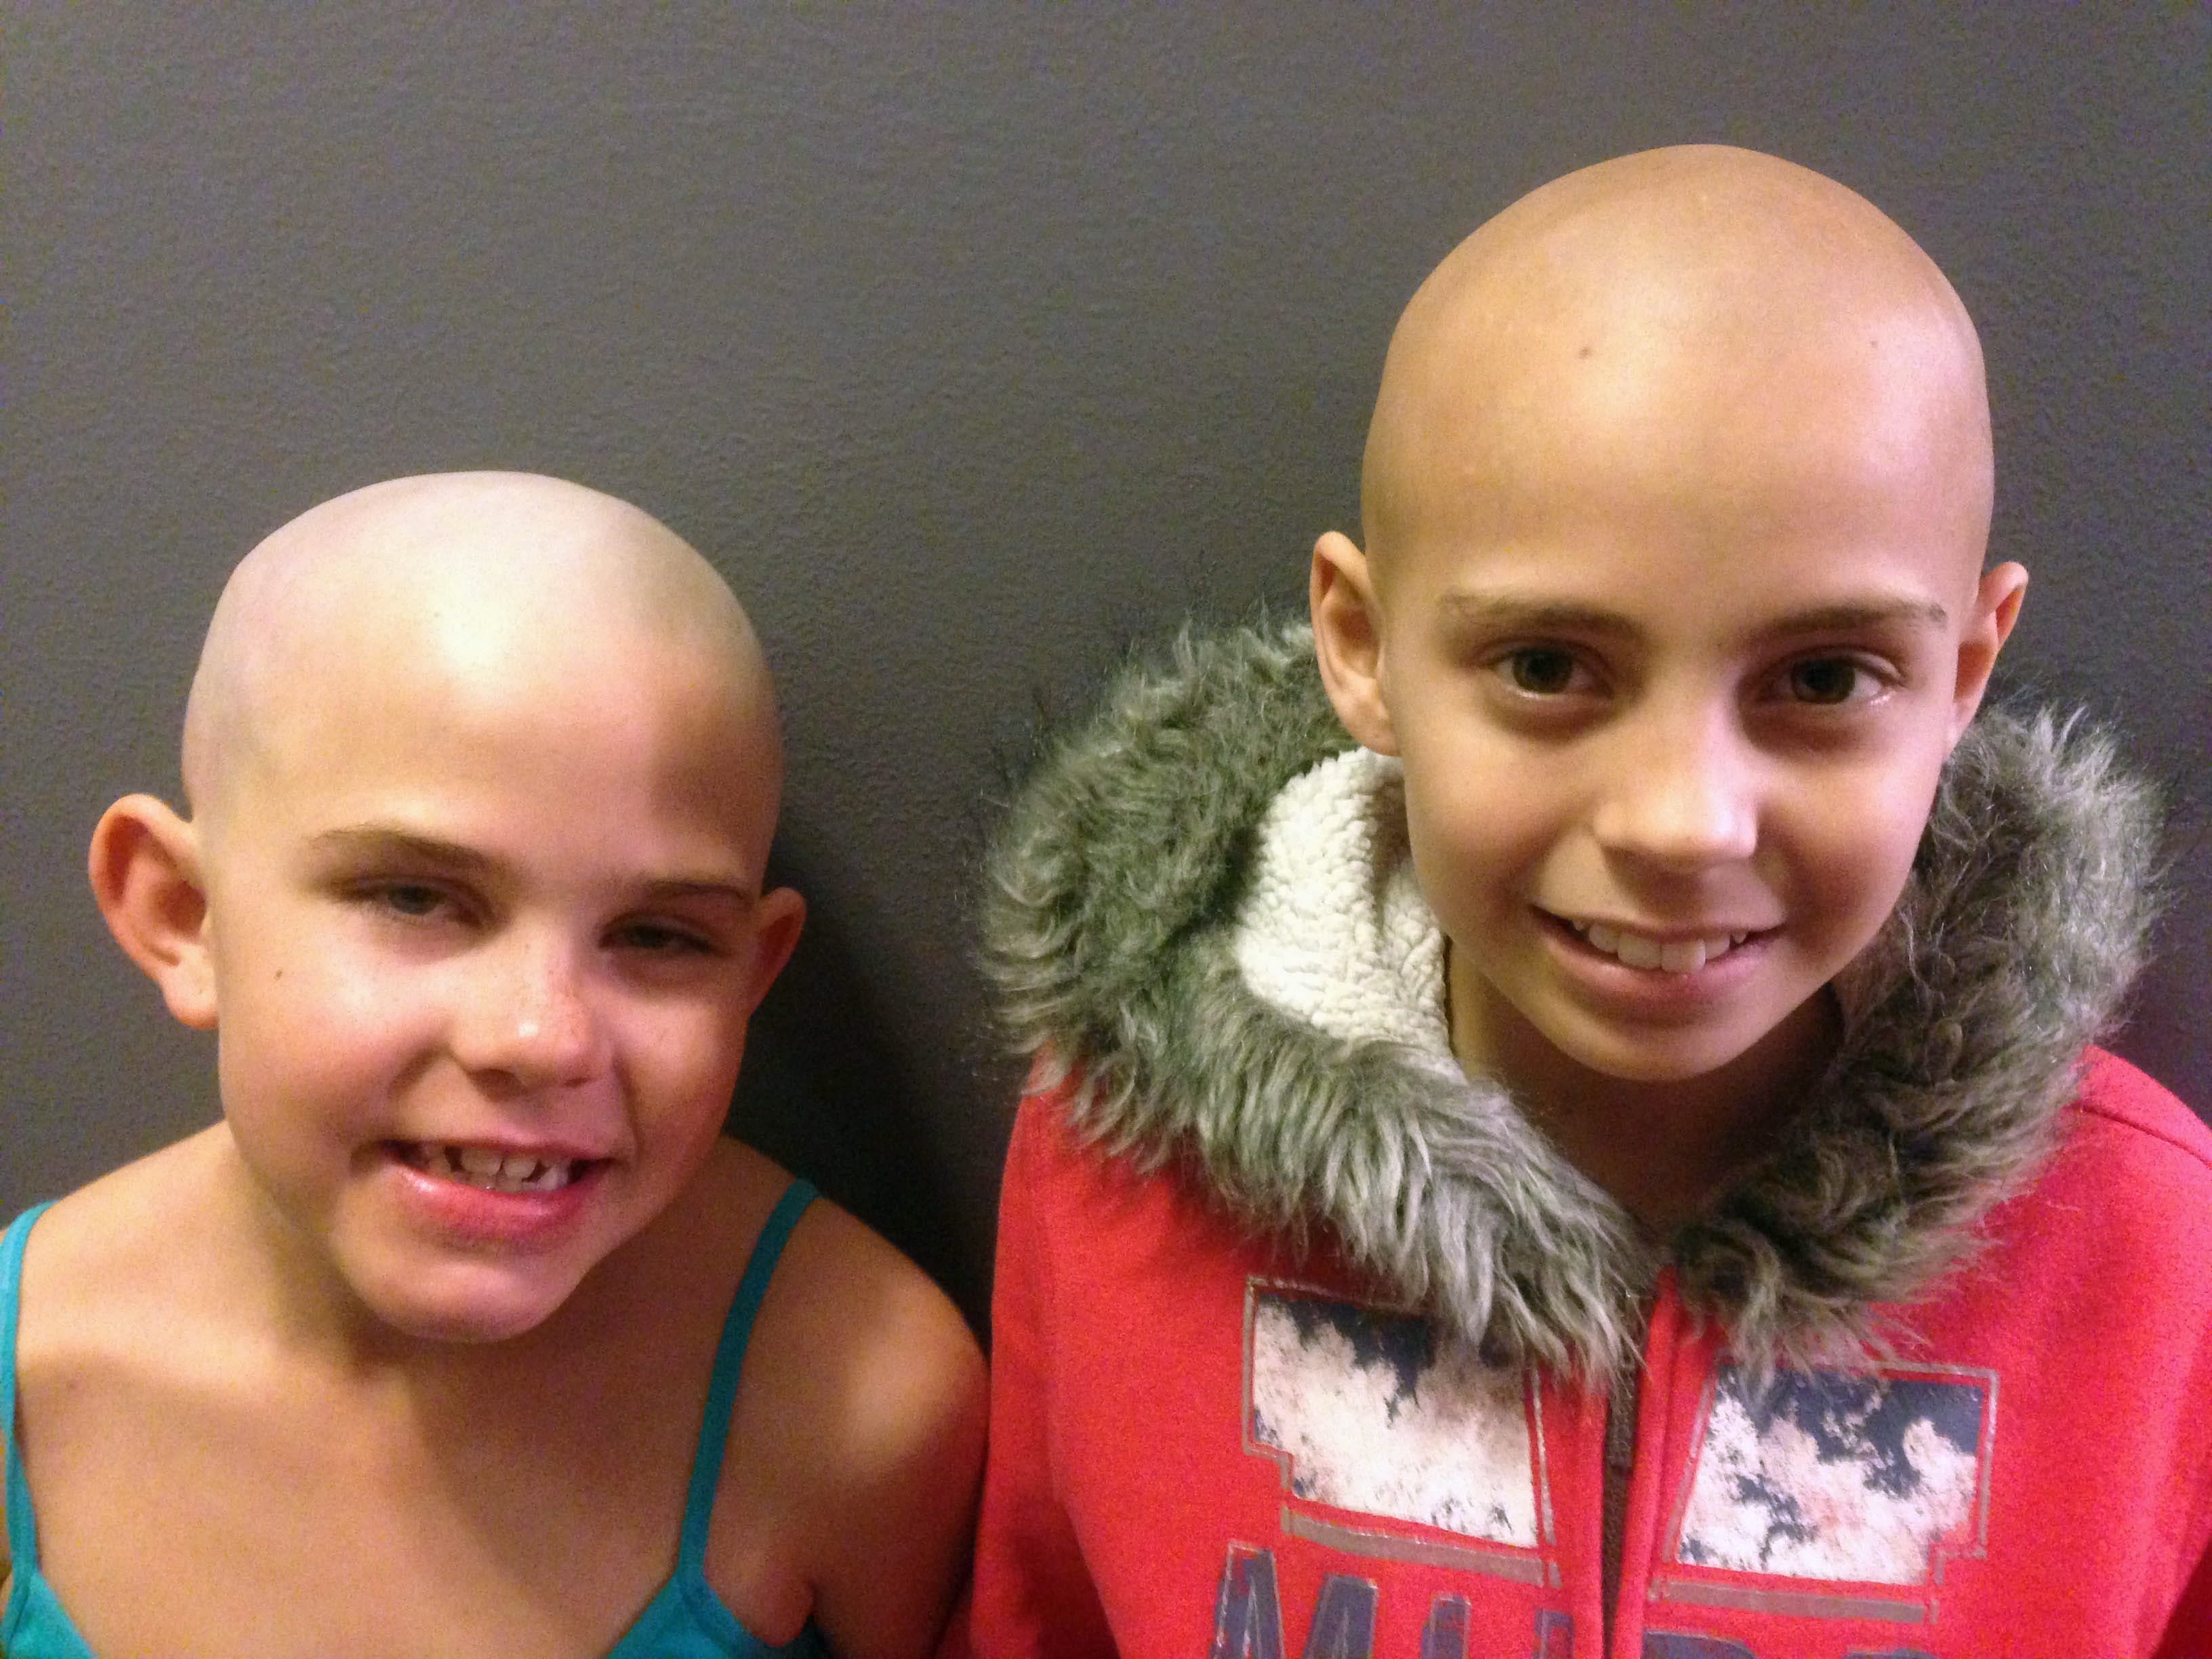 Contributed photo
Kamryn Renfro, 9, left, sharved her head after friend Delaney Clements, 11, lost her hair during treatment for cancer. Kamryn was suspended from her Grand Junction, Colo., school, though the decision was quickly reversed.